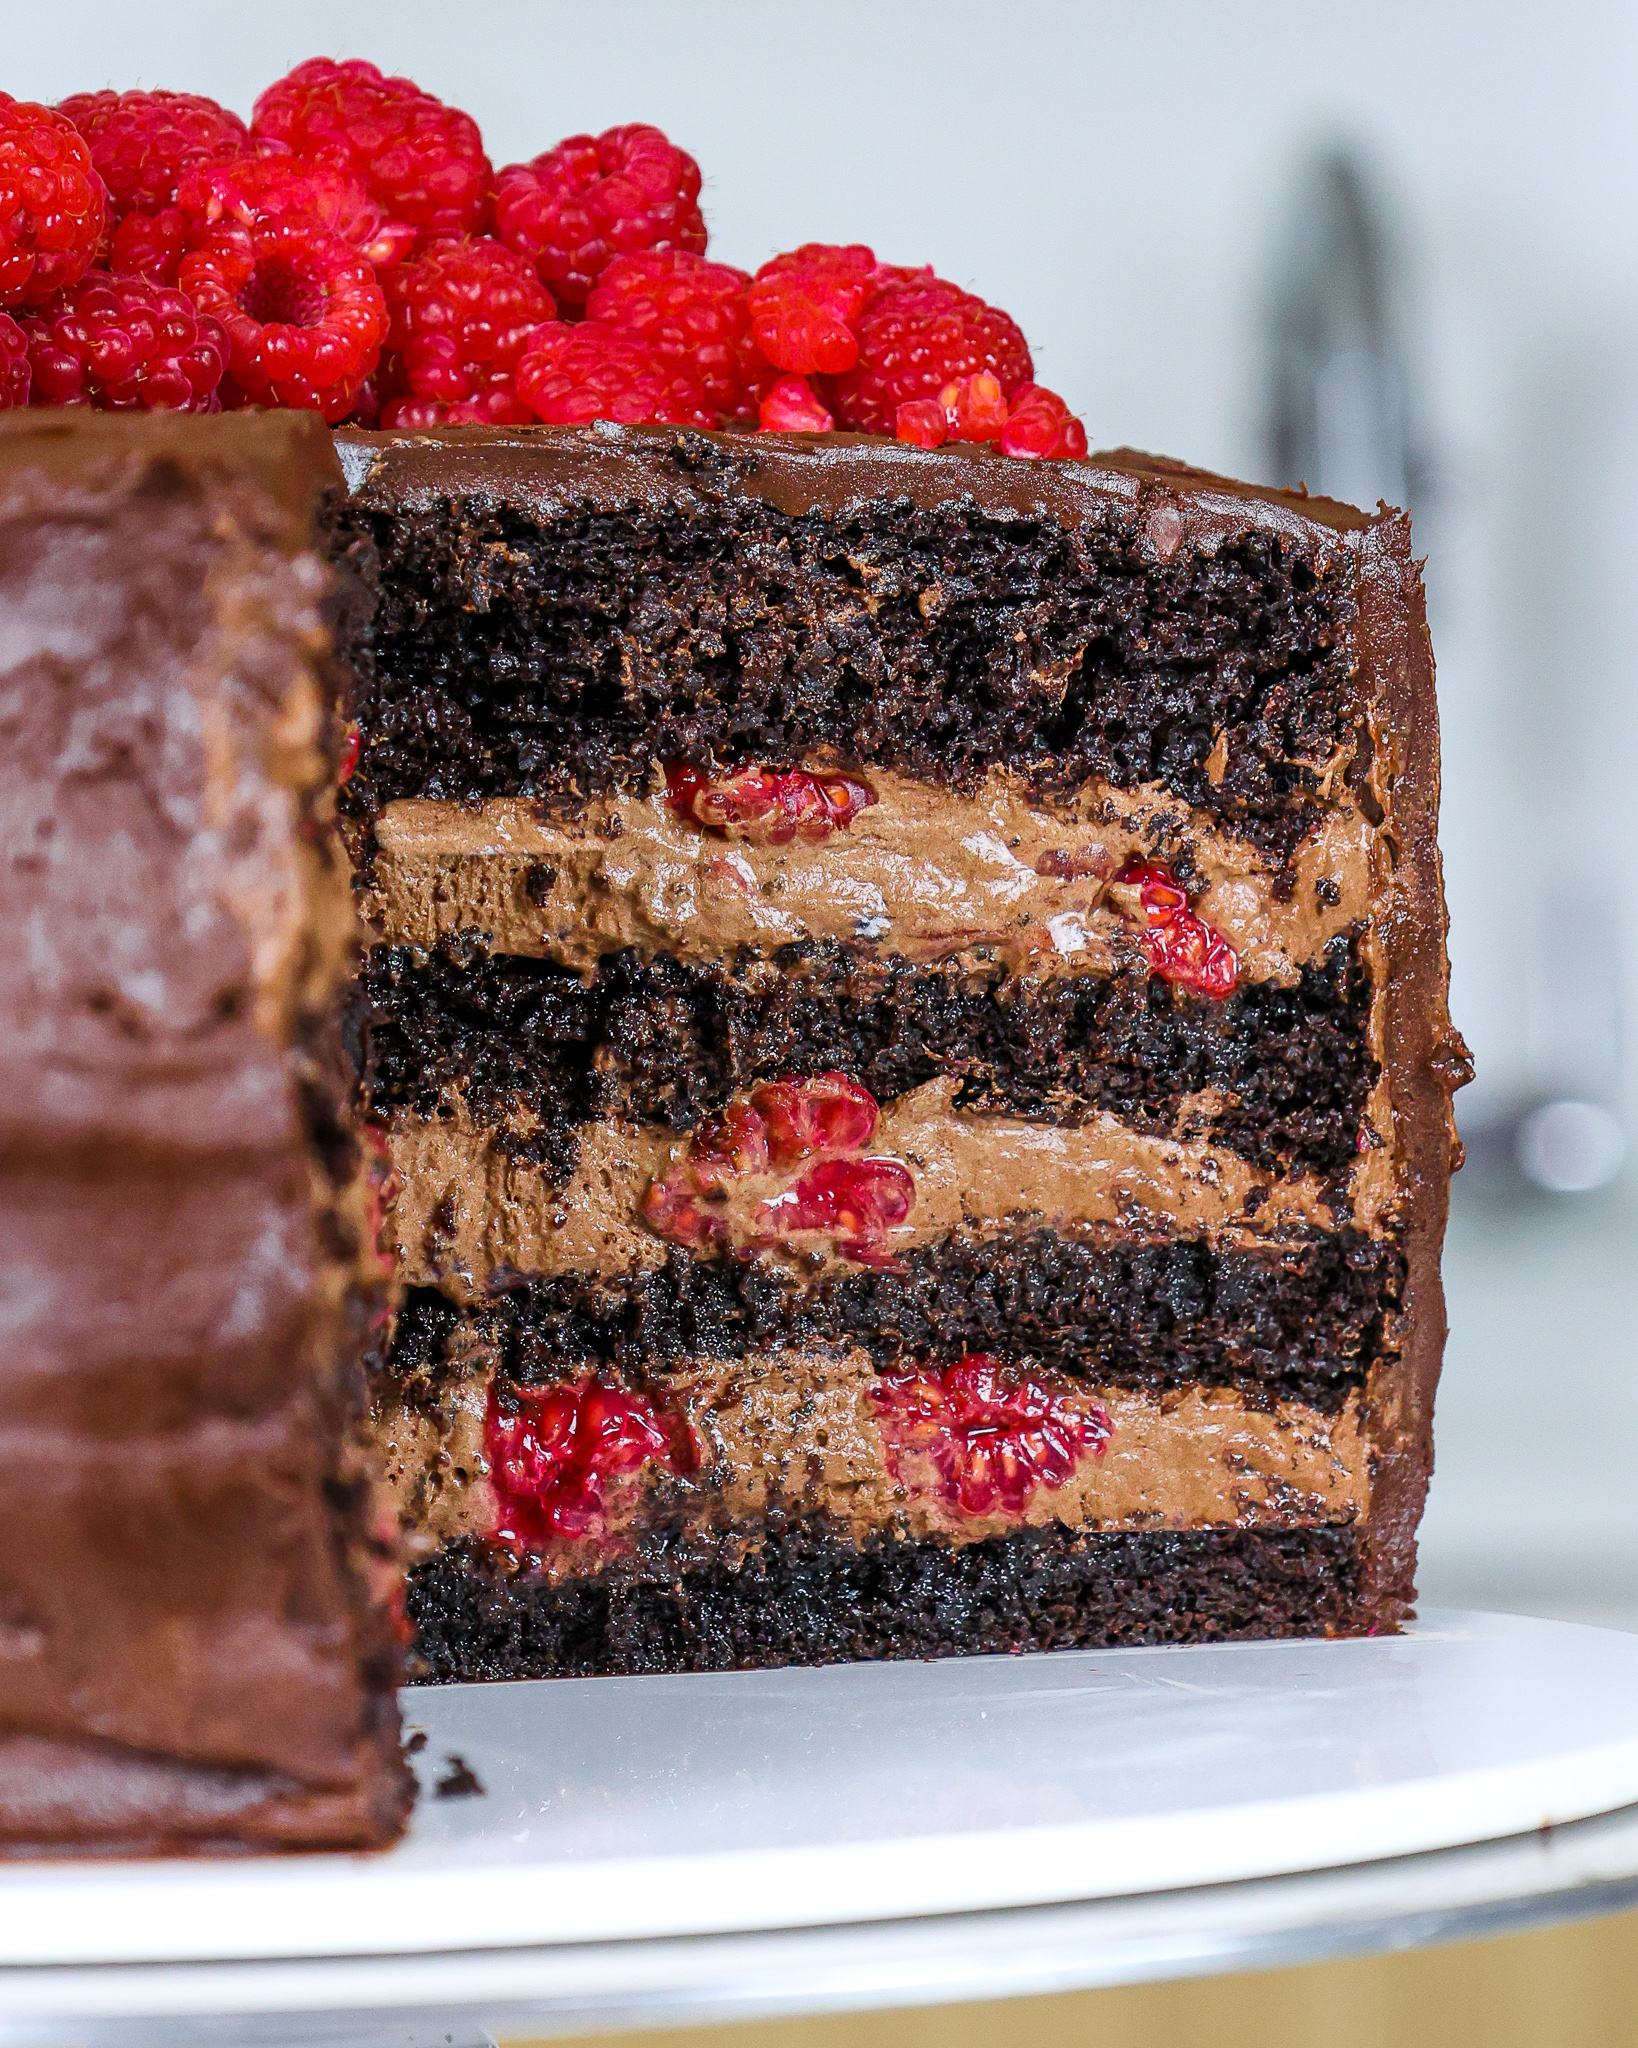 image of delicious chocolate raspberry mousse cake that's been cut into to show it's moist layers of chocolate cake and chocolate mousse filling